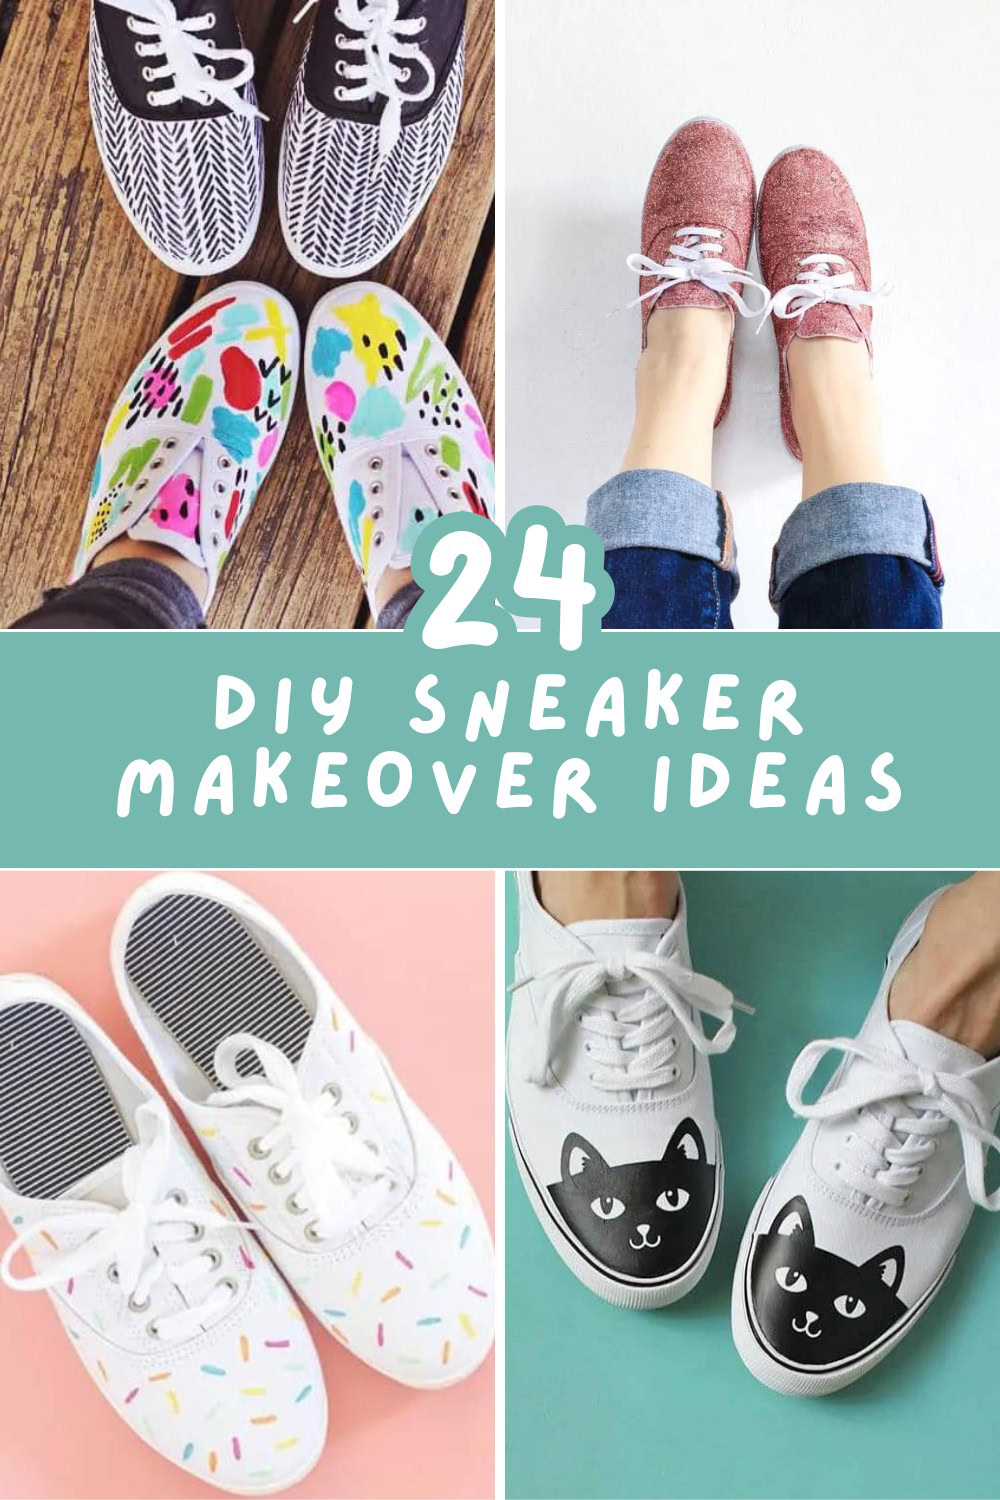 No need to splurge on designer kicks! Discover a stack of amazing and budget-friendly ideas to customize your sneakers. Get ready to turn your plain shoes into unique masterpieces! #DIYSneakers #CustomFootwear

